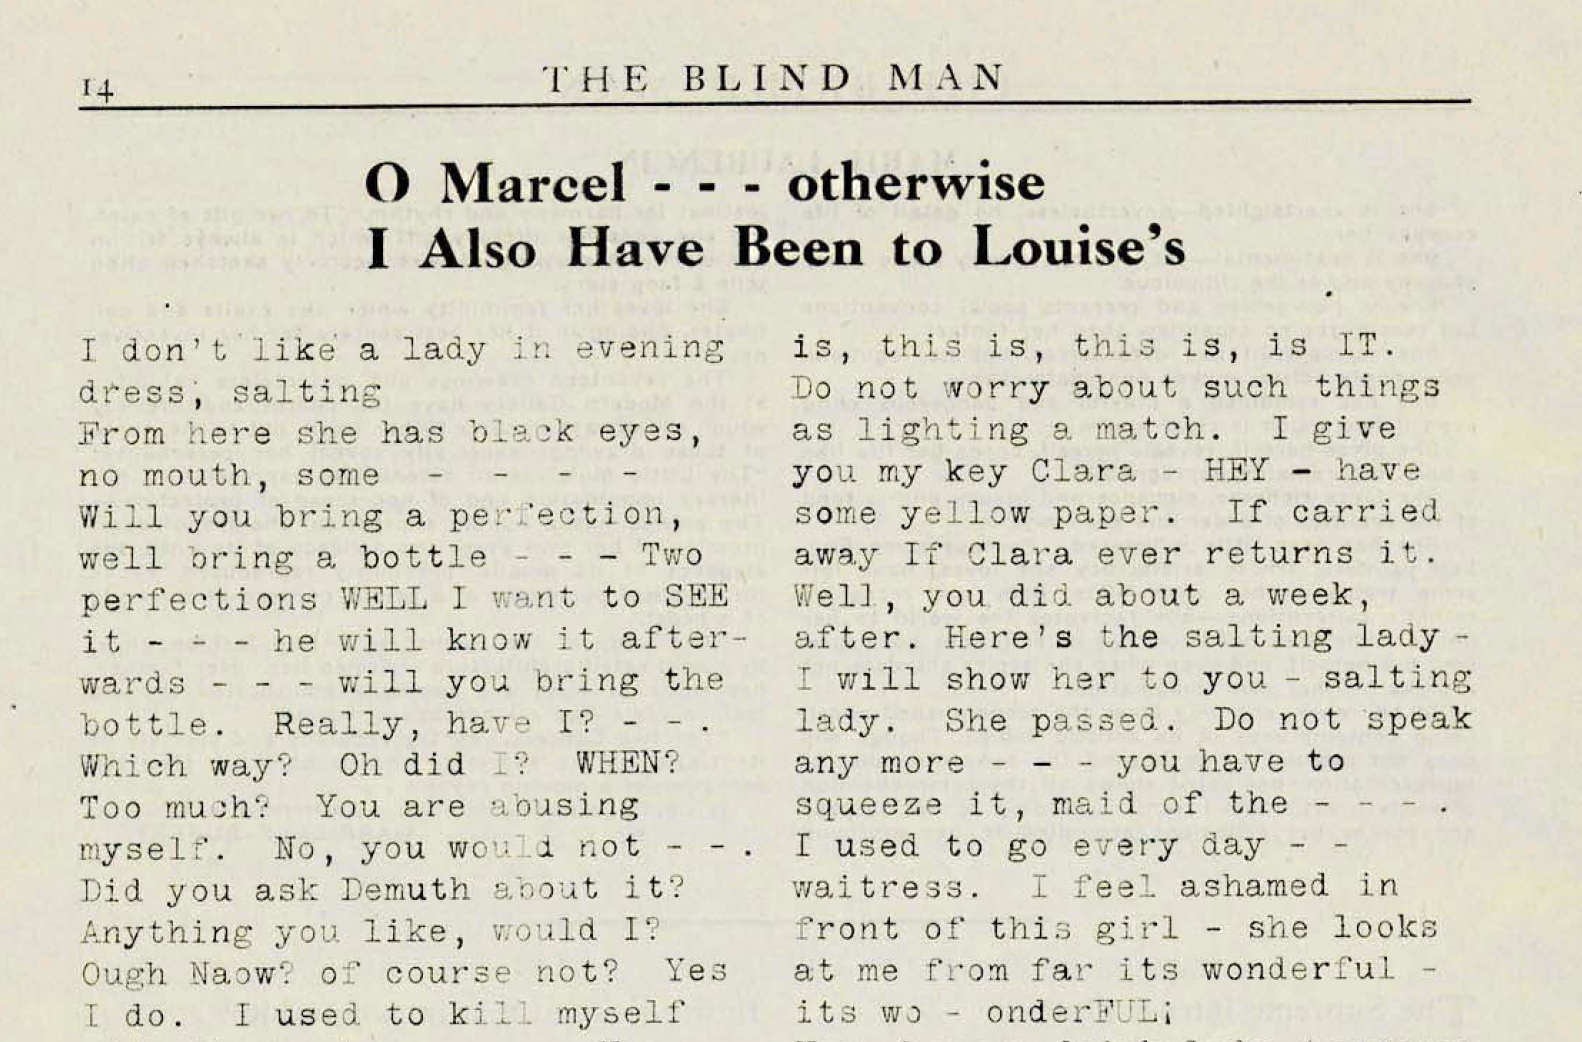 Excerpt from top of the page of Loy's "O Marcel"